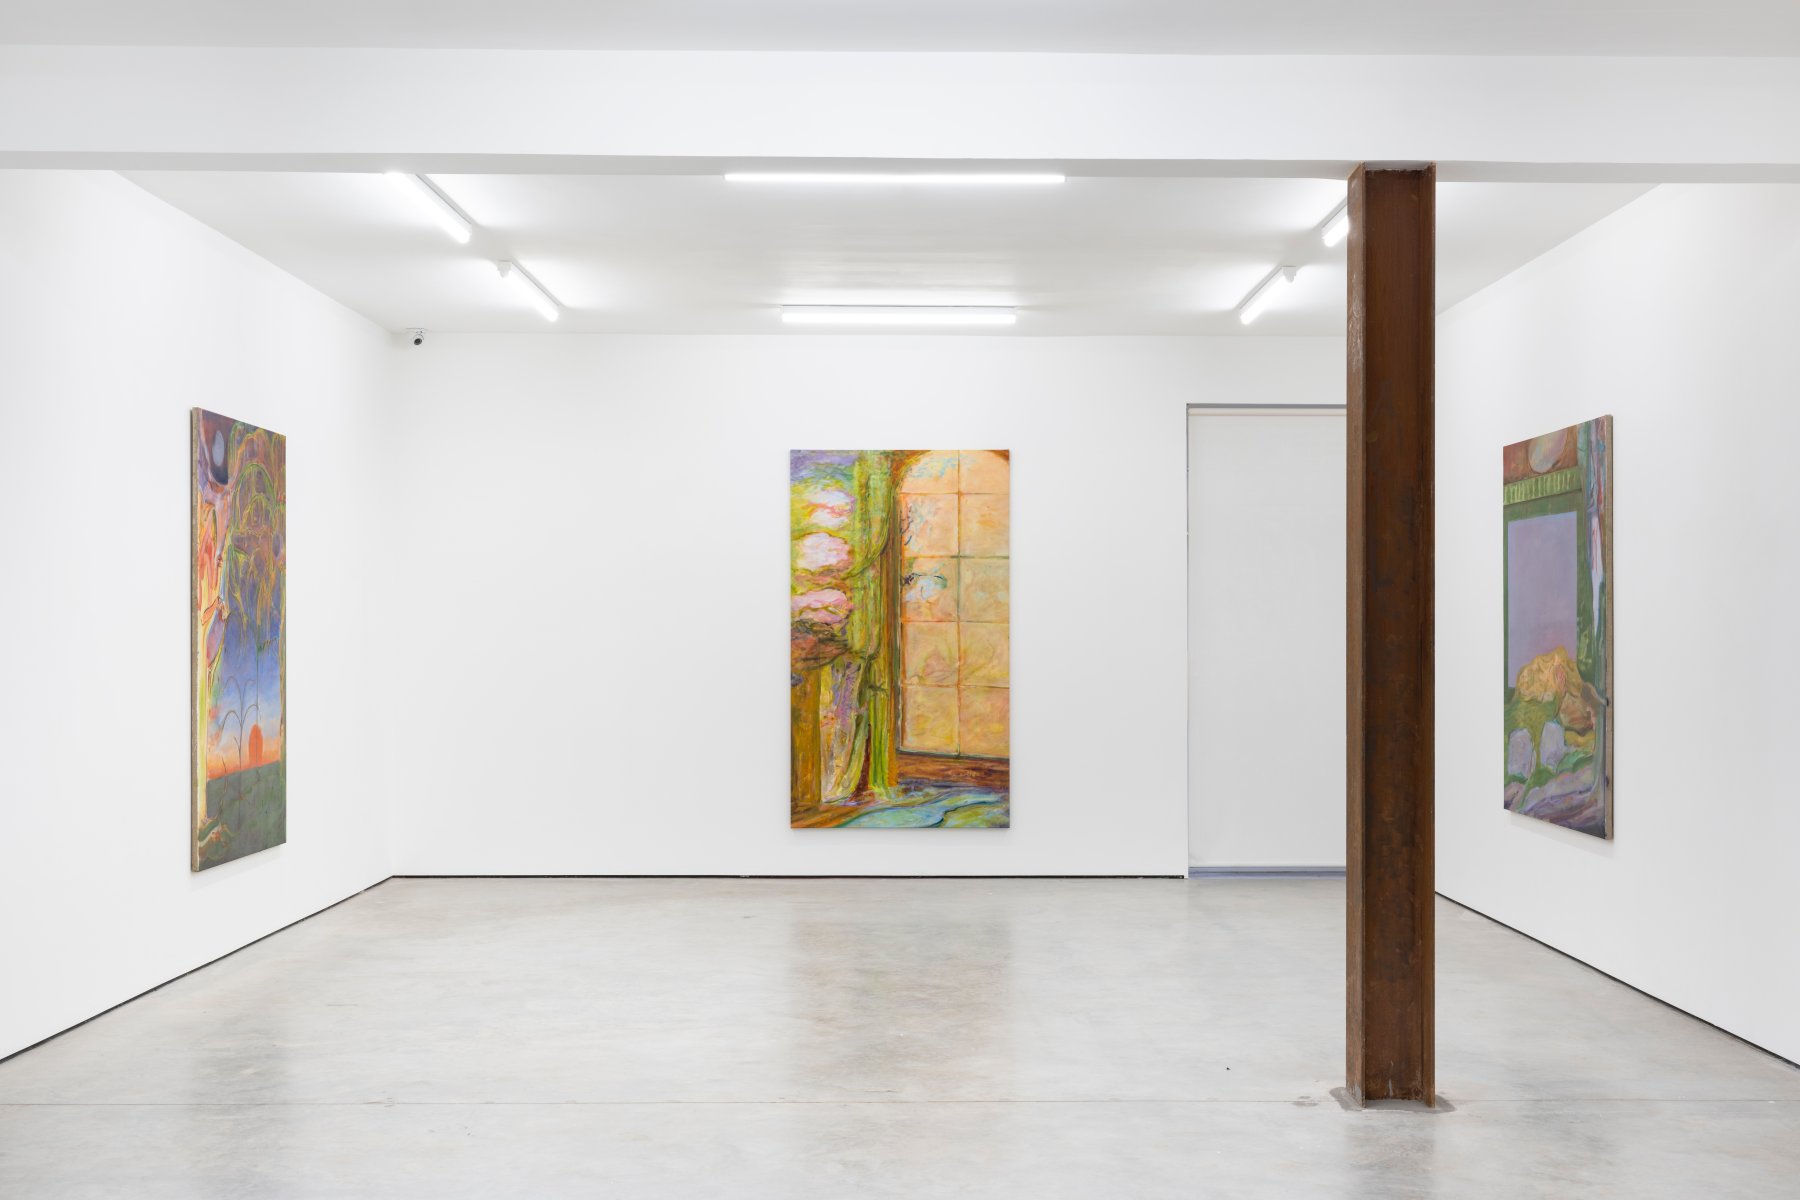 Installation image for Paul Bonnet: Abeyance, at MAMOTH